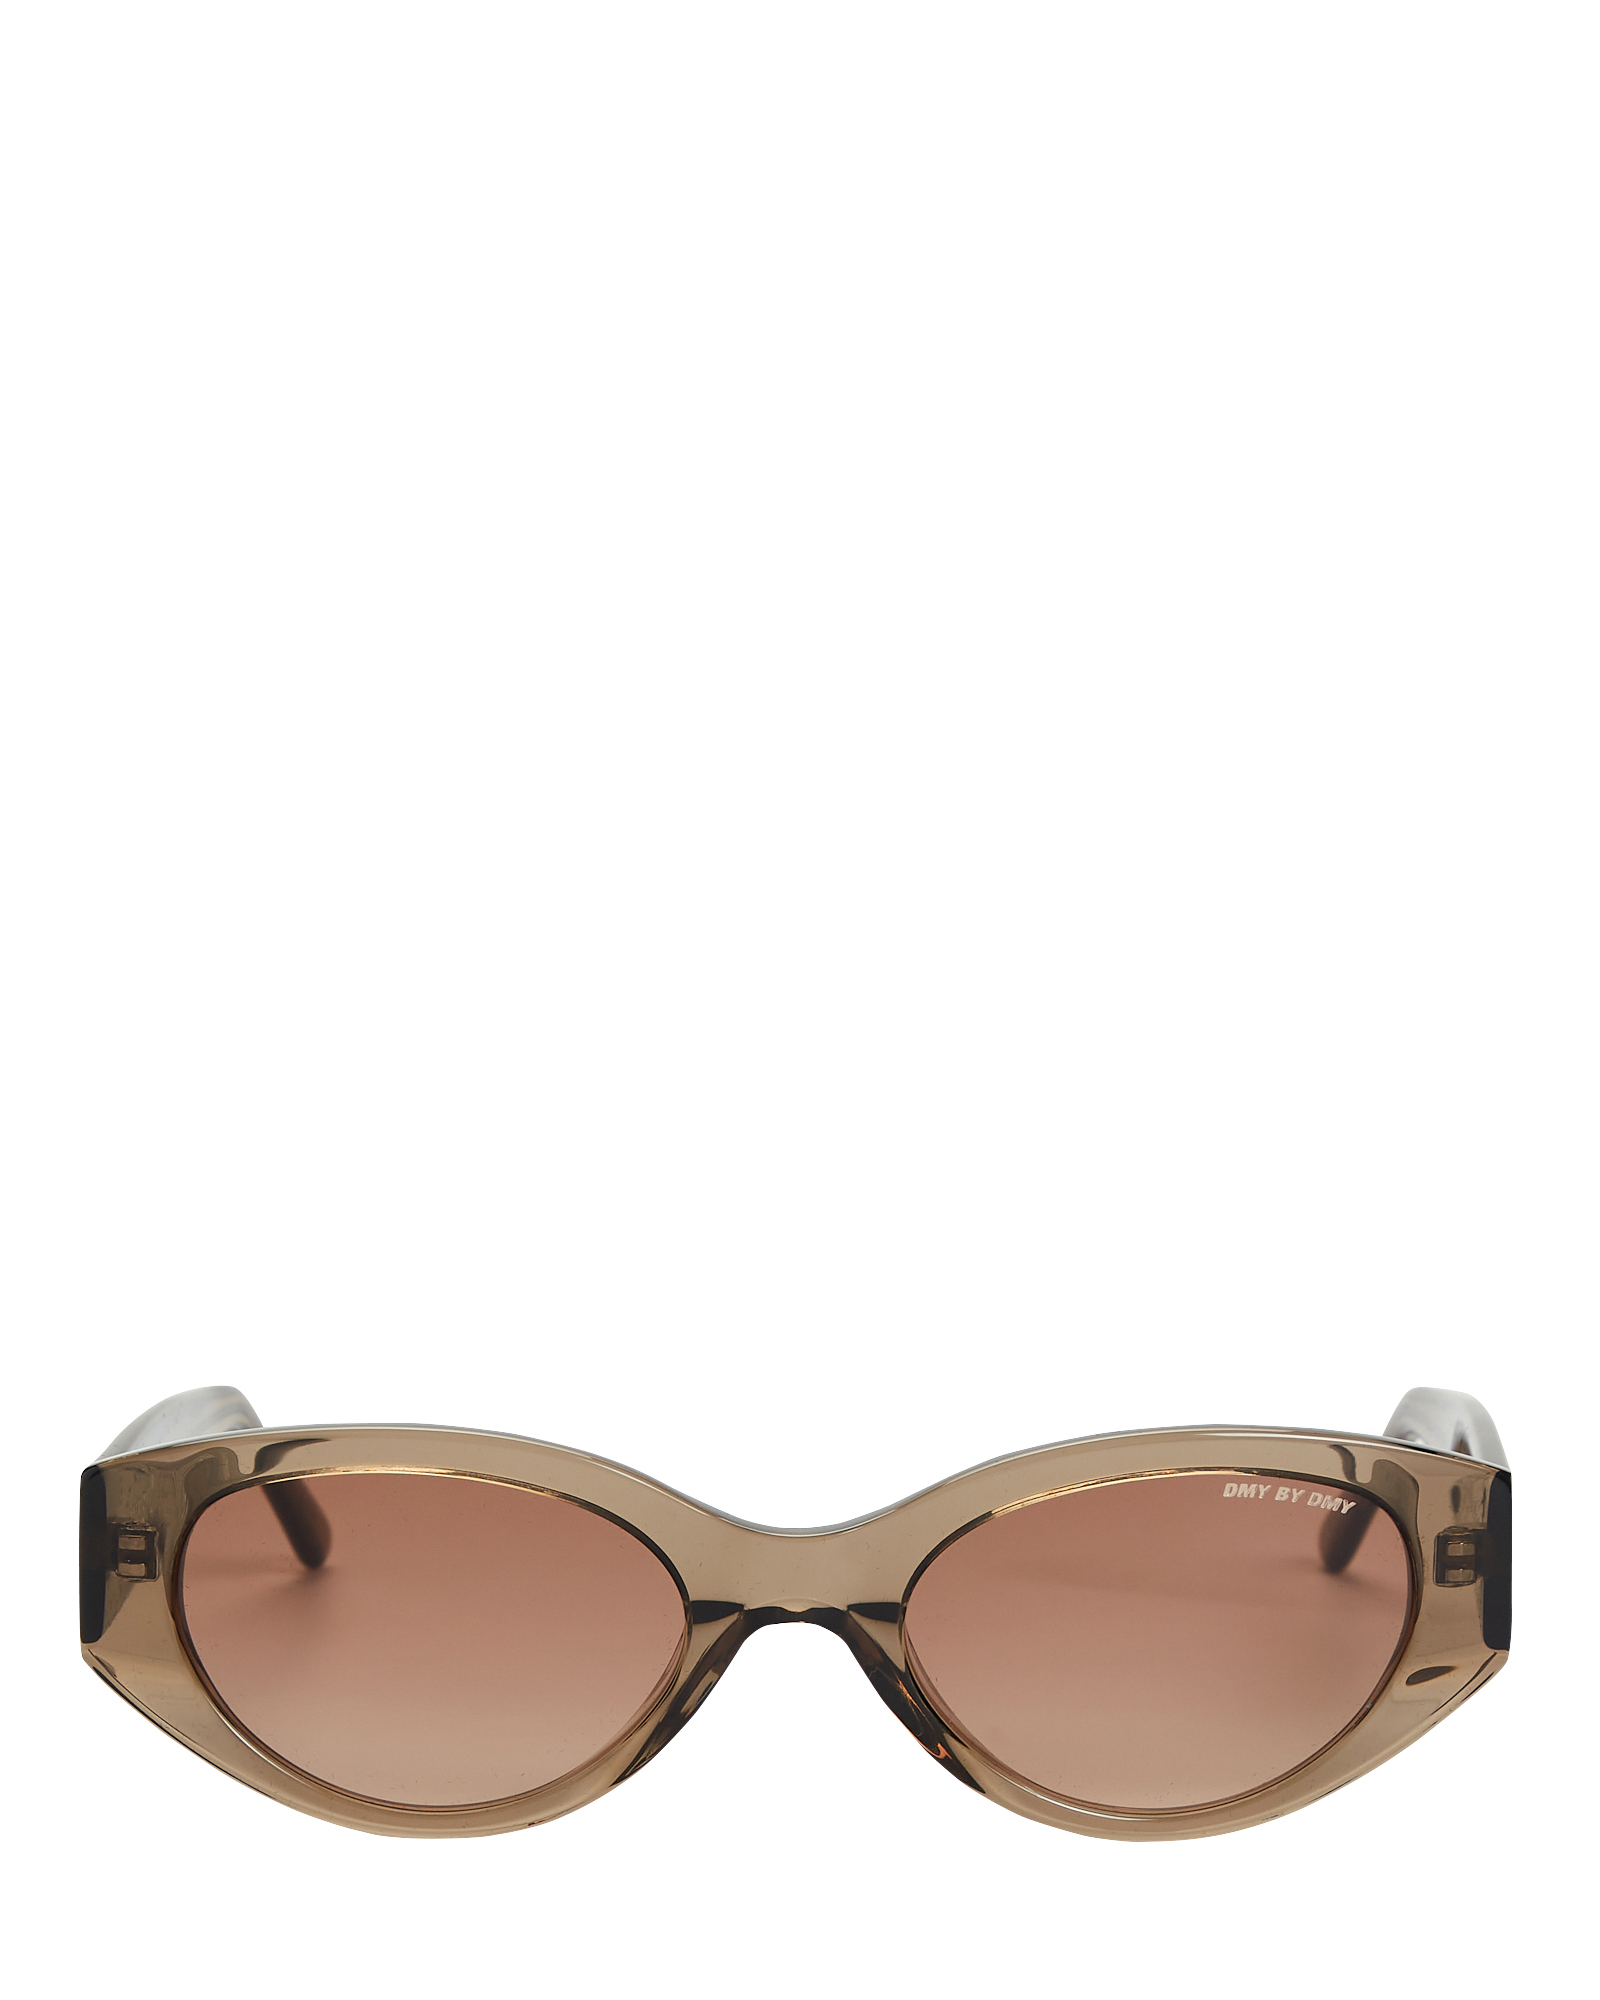 DMY BY DMY QUIN CAT EYE SUNGLASSES